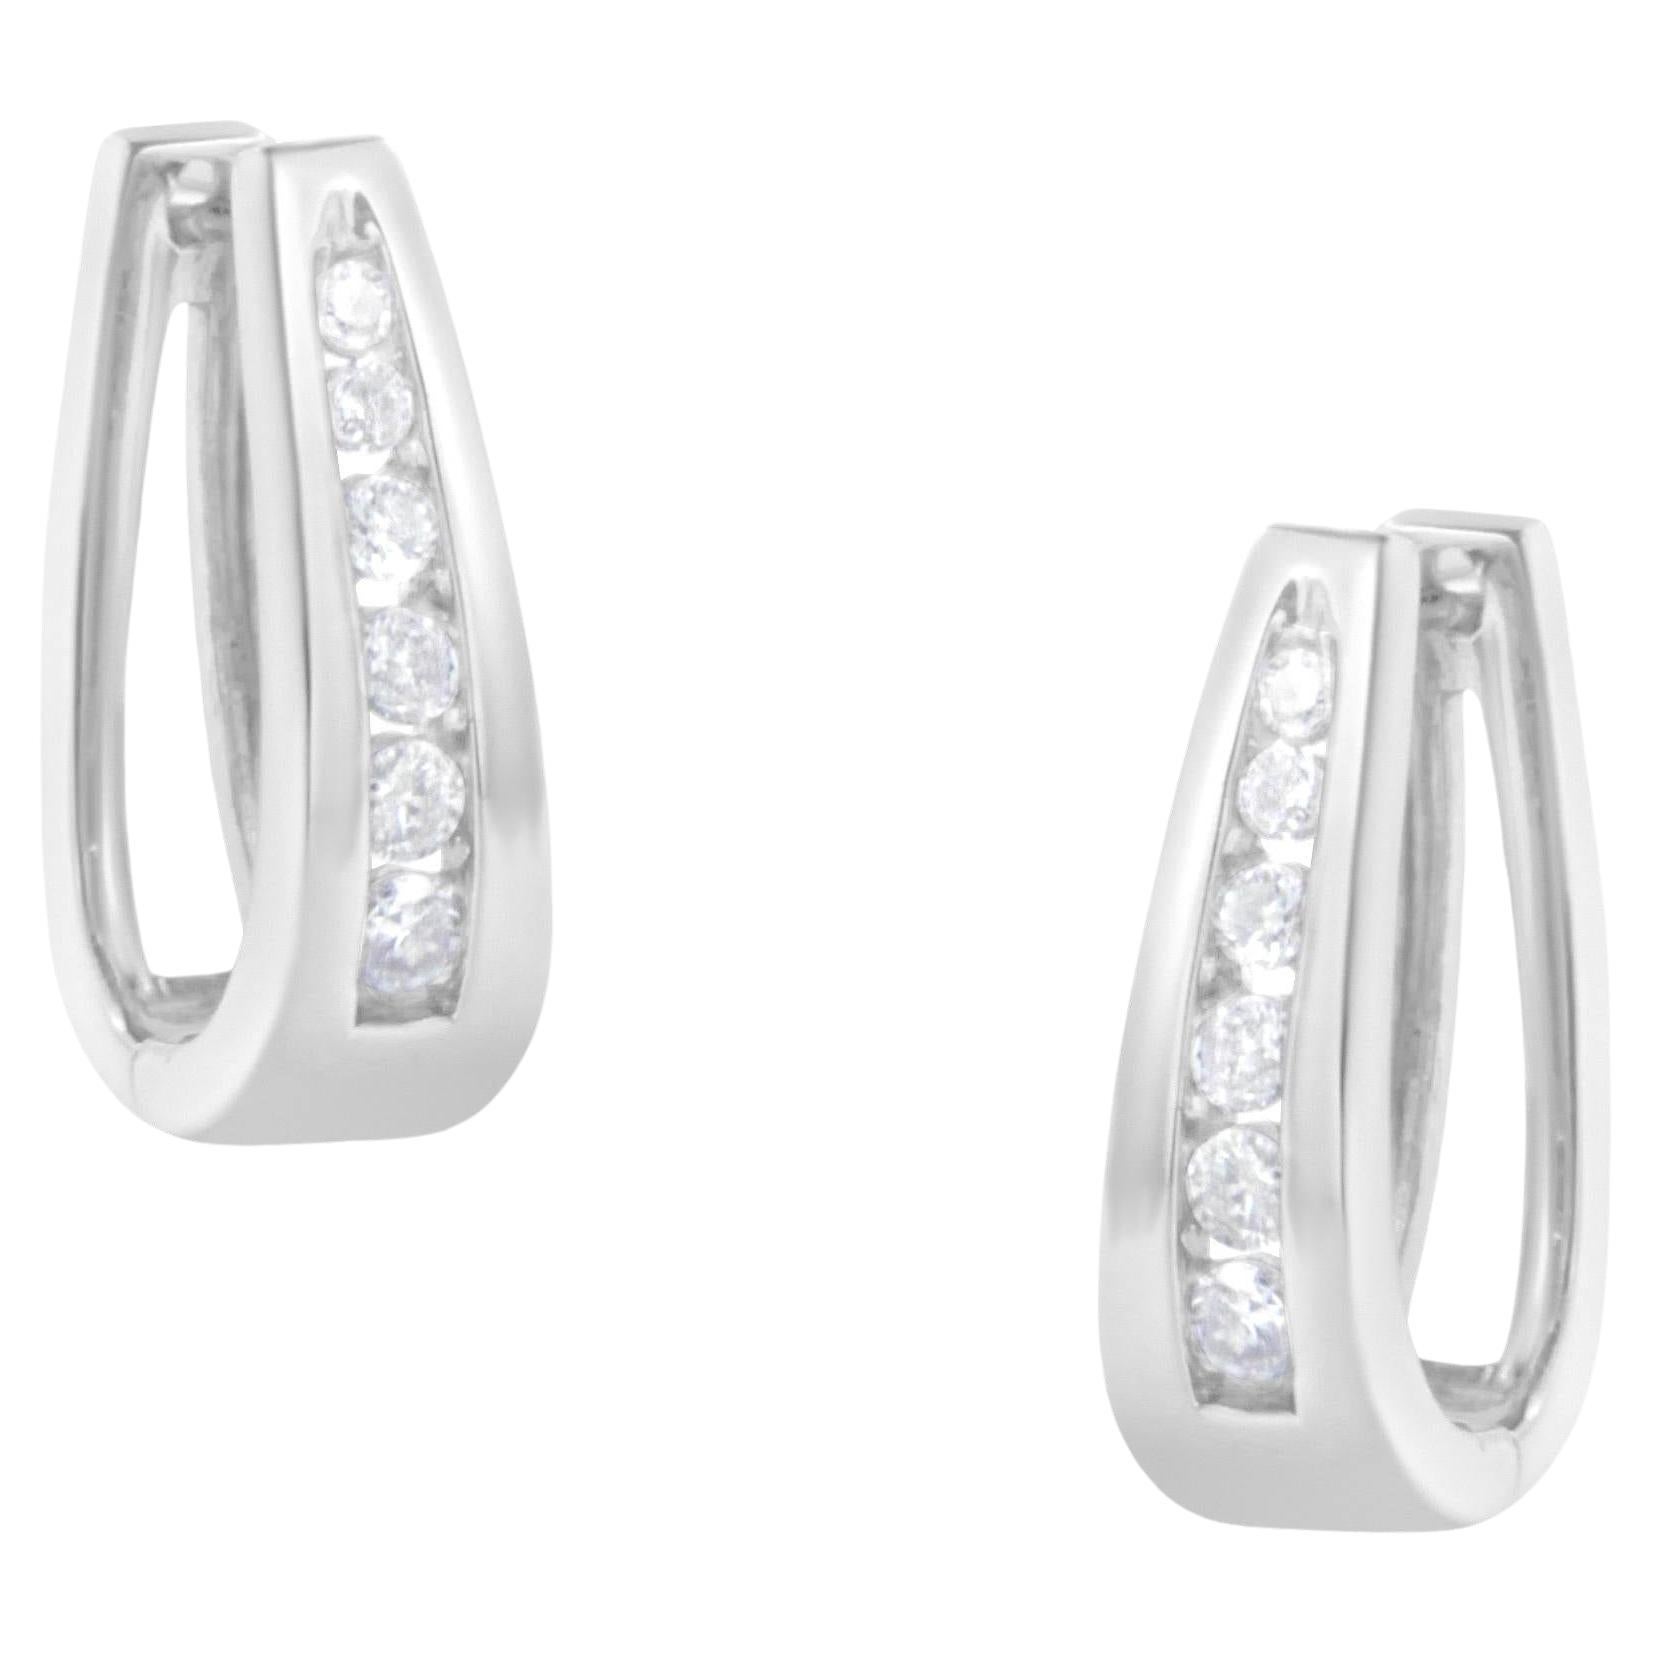 Diamond Huggies Earrings Round Brilliant Cut 0.5 Carats 14K White Gold For Sale